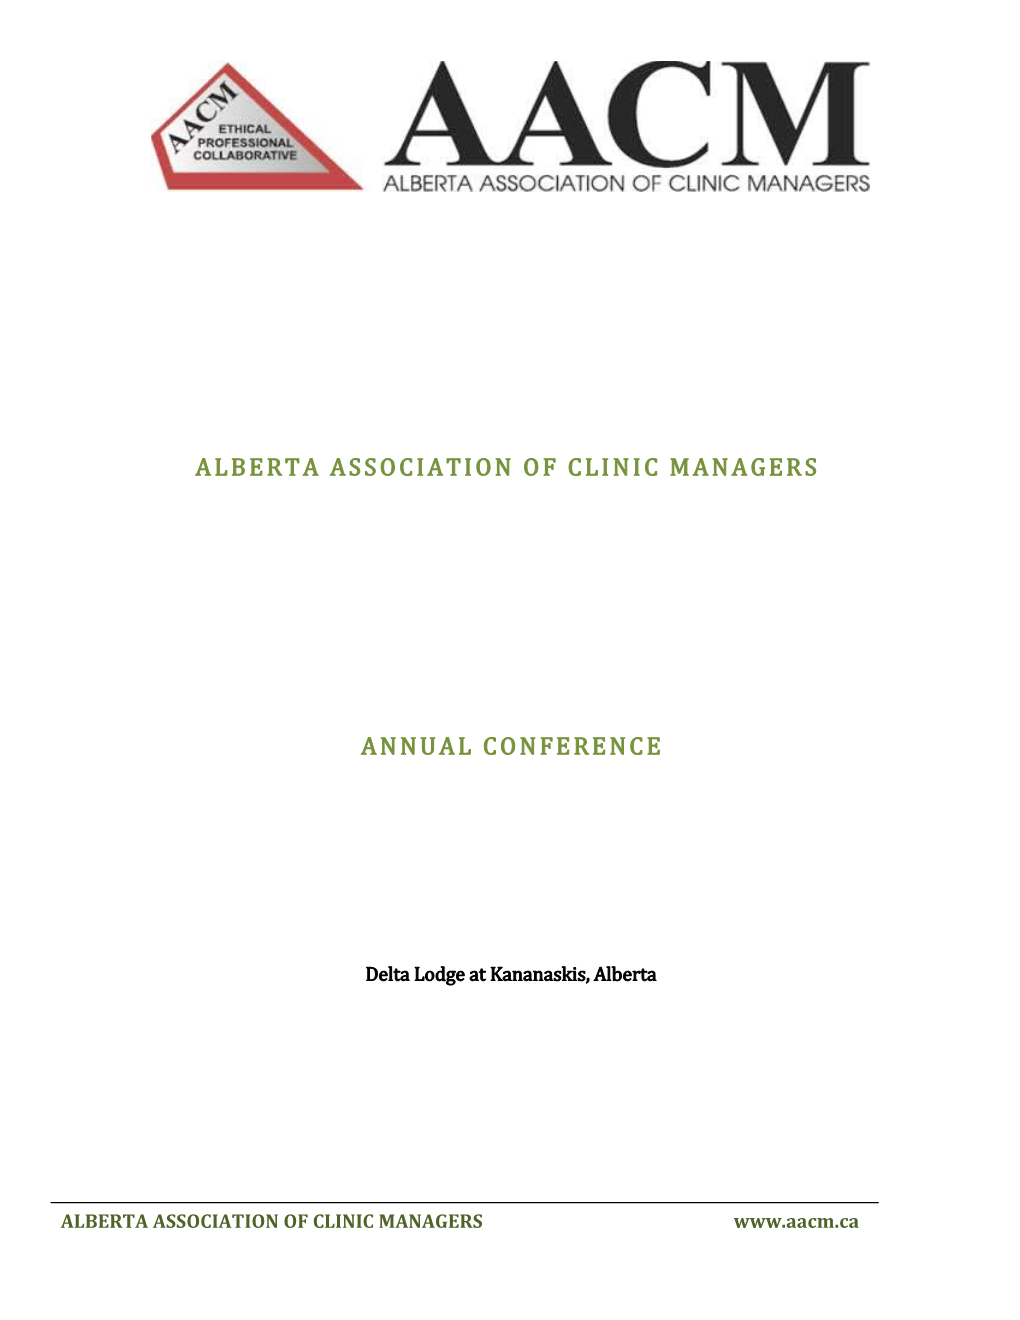 Alberta Association of Clinic Managers